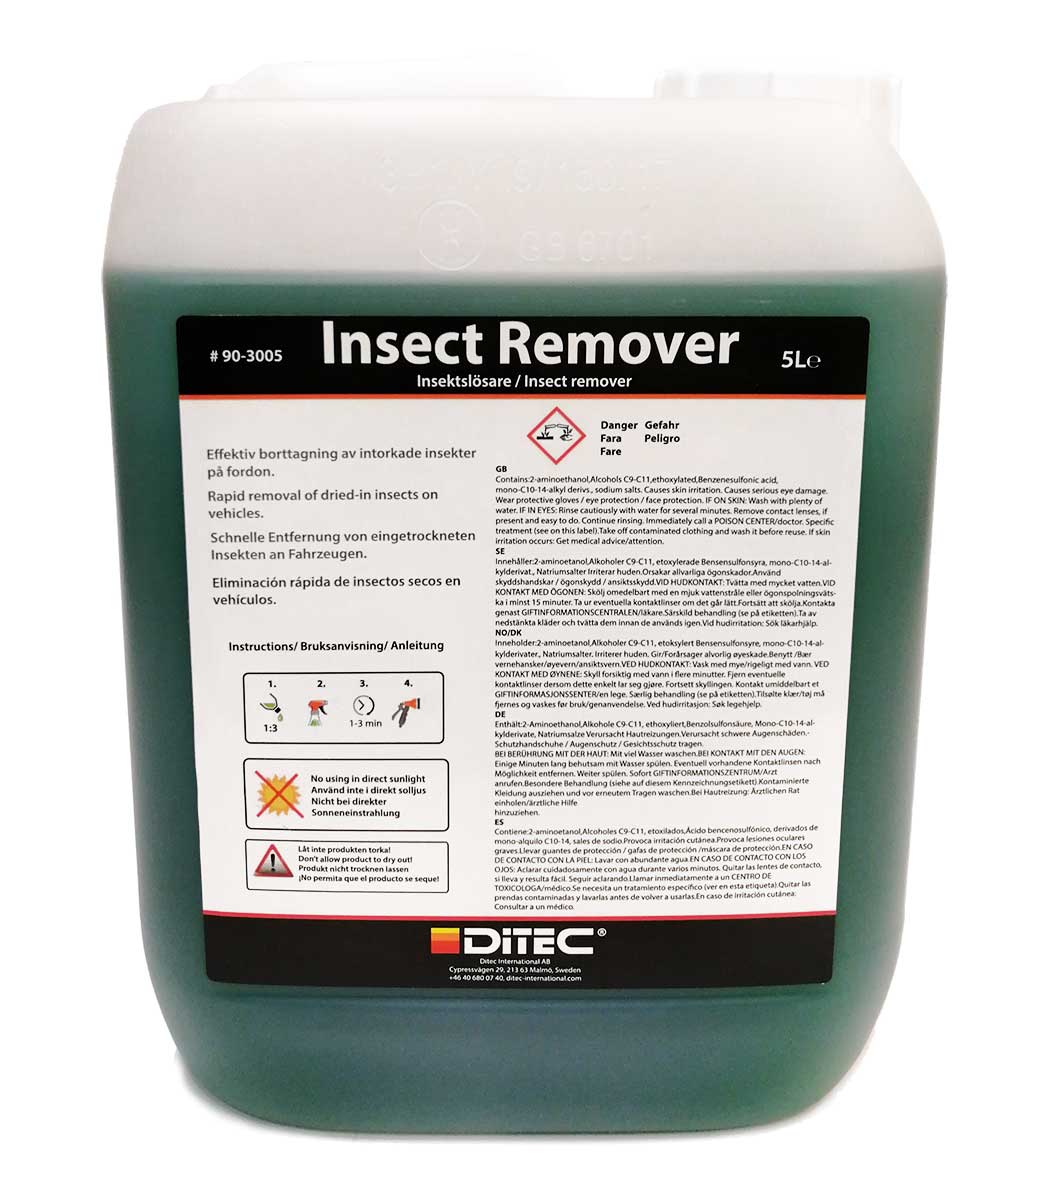 Ditec Insect Remover, 5 Liter